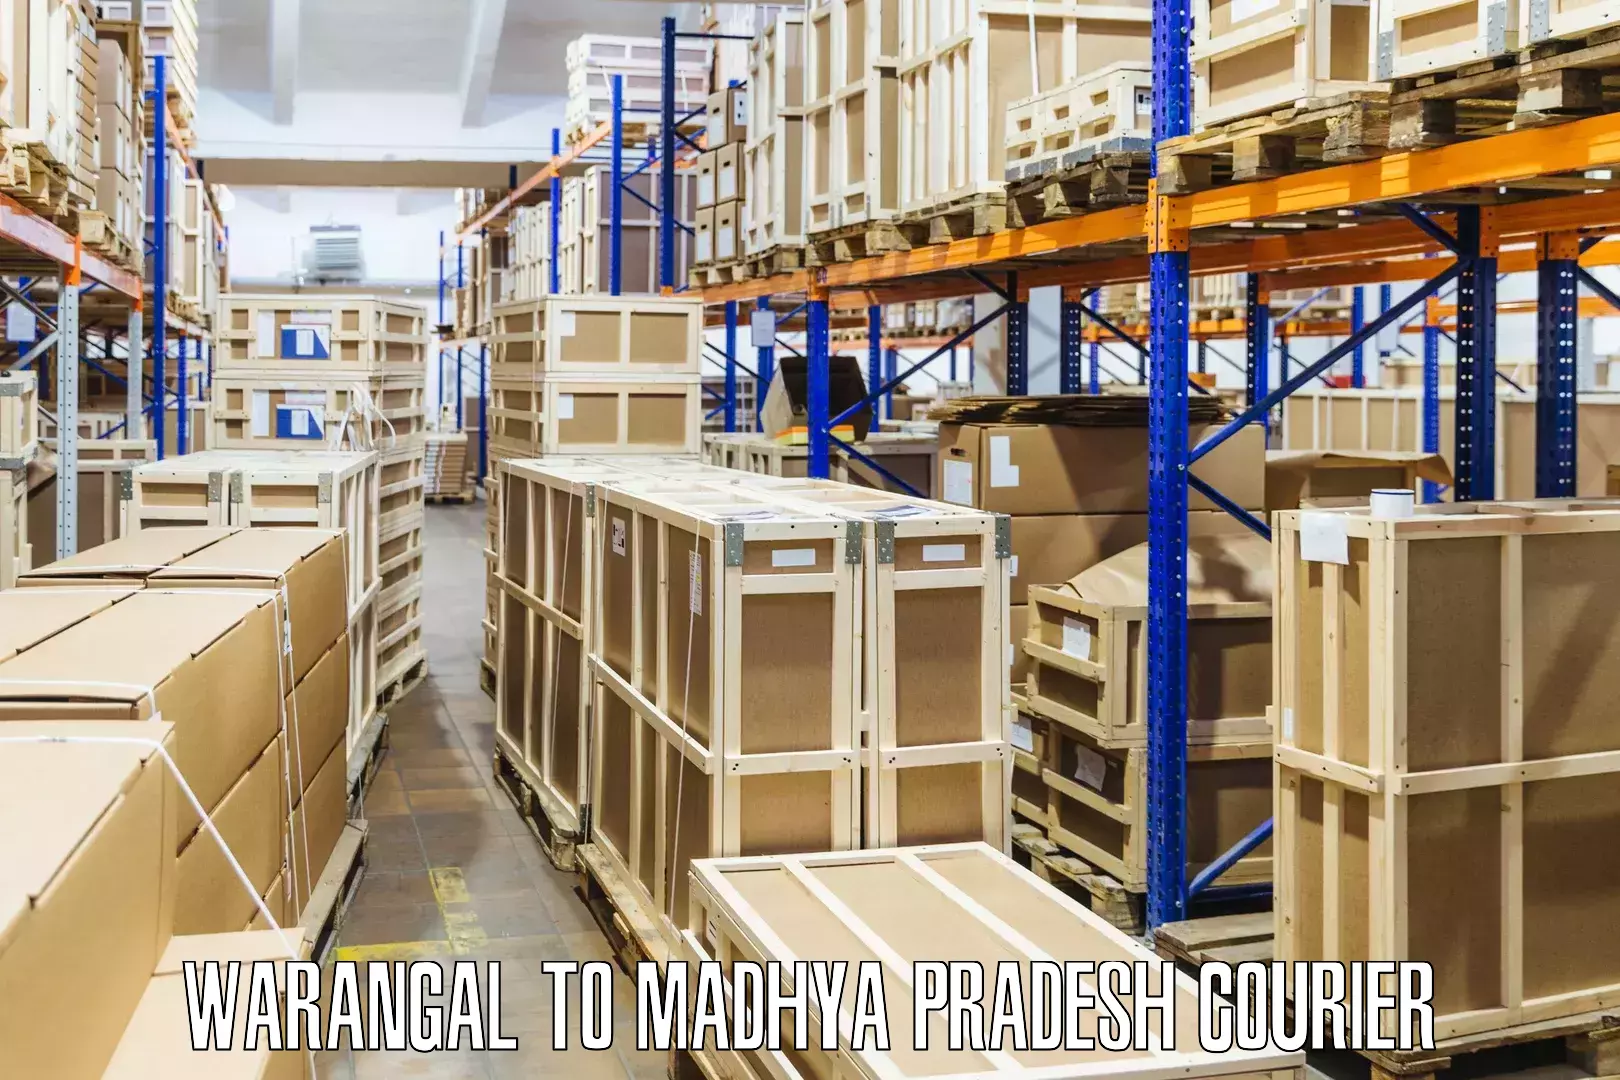 Reliable parcel services in Warangal to Madhya Pradesh